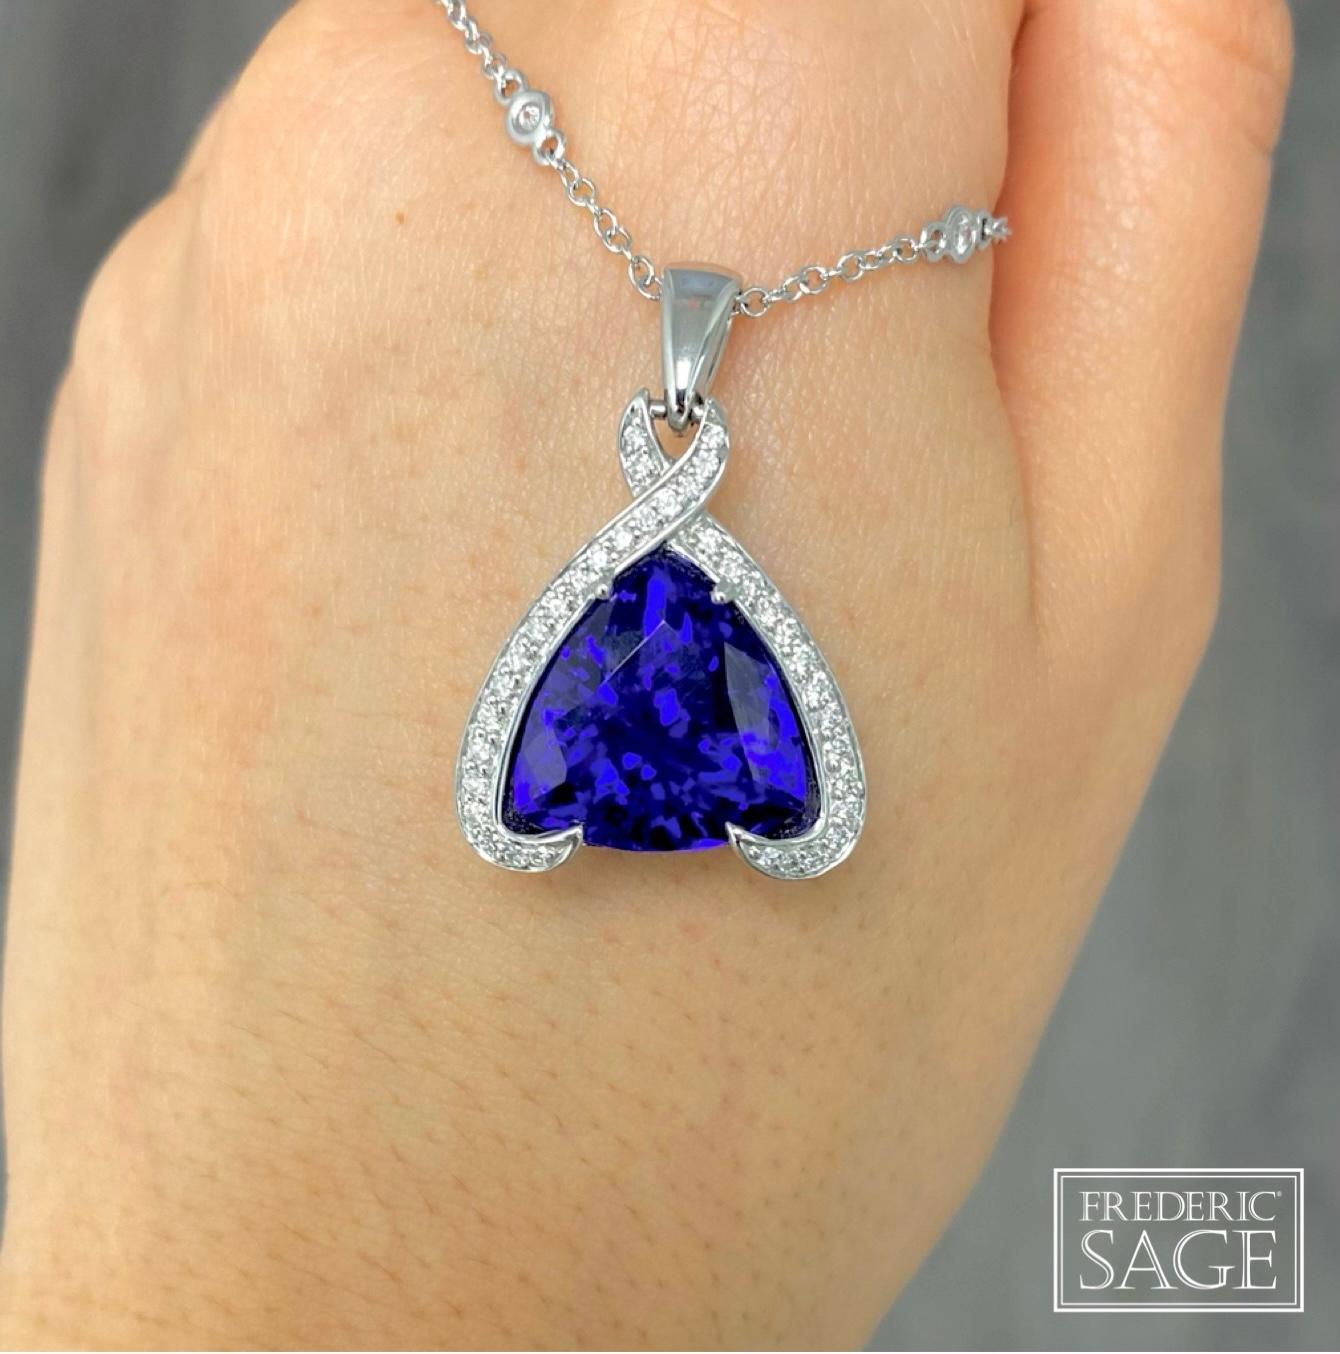 Frederic Sage Pendant Necklace in Trillion Gem Tanzanite on White Gold In New Condition For Sale In Great Neck, NY